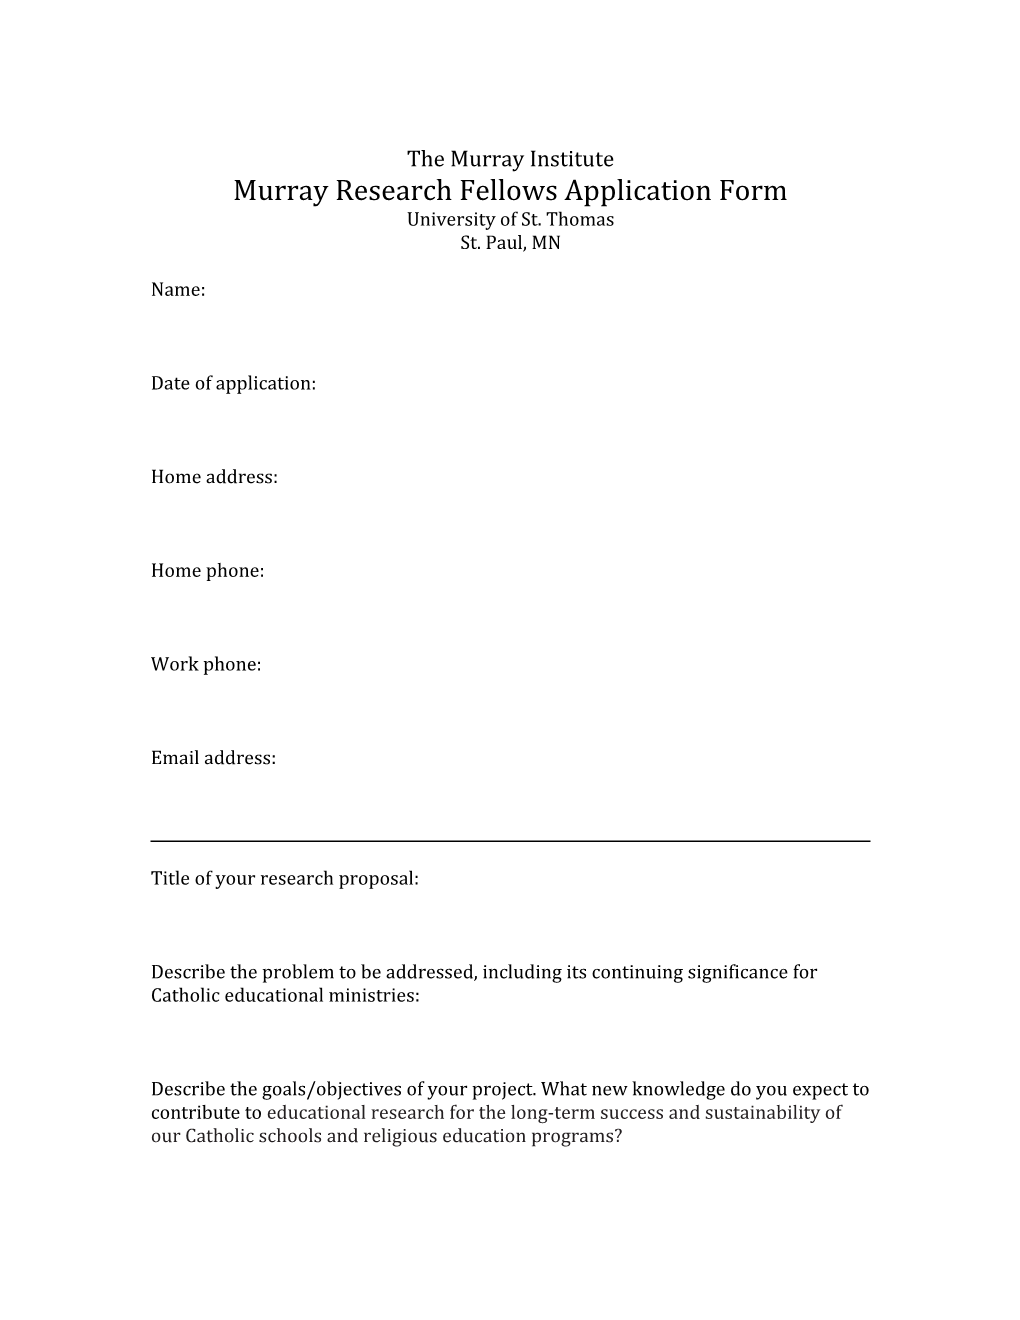 Murray Research Fellows Application Form